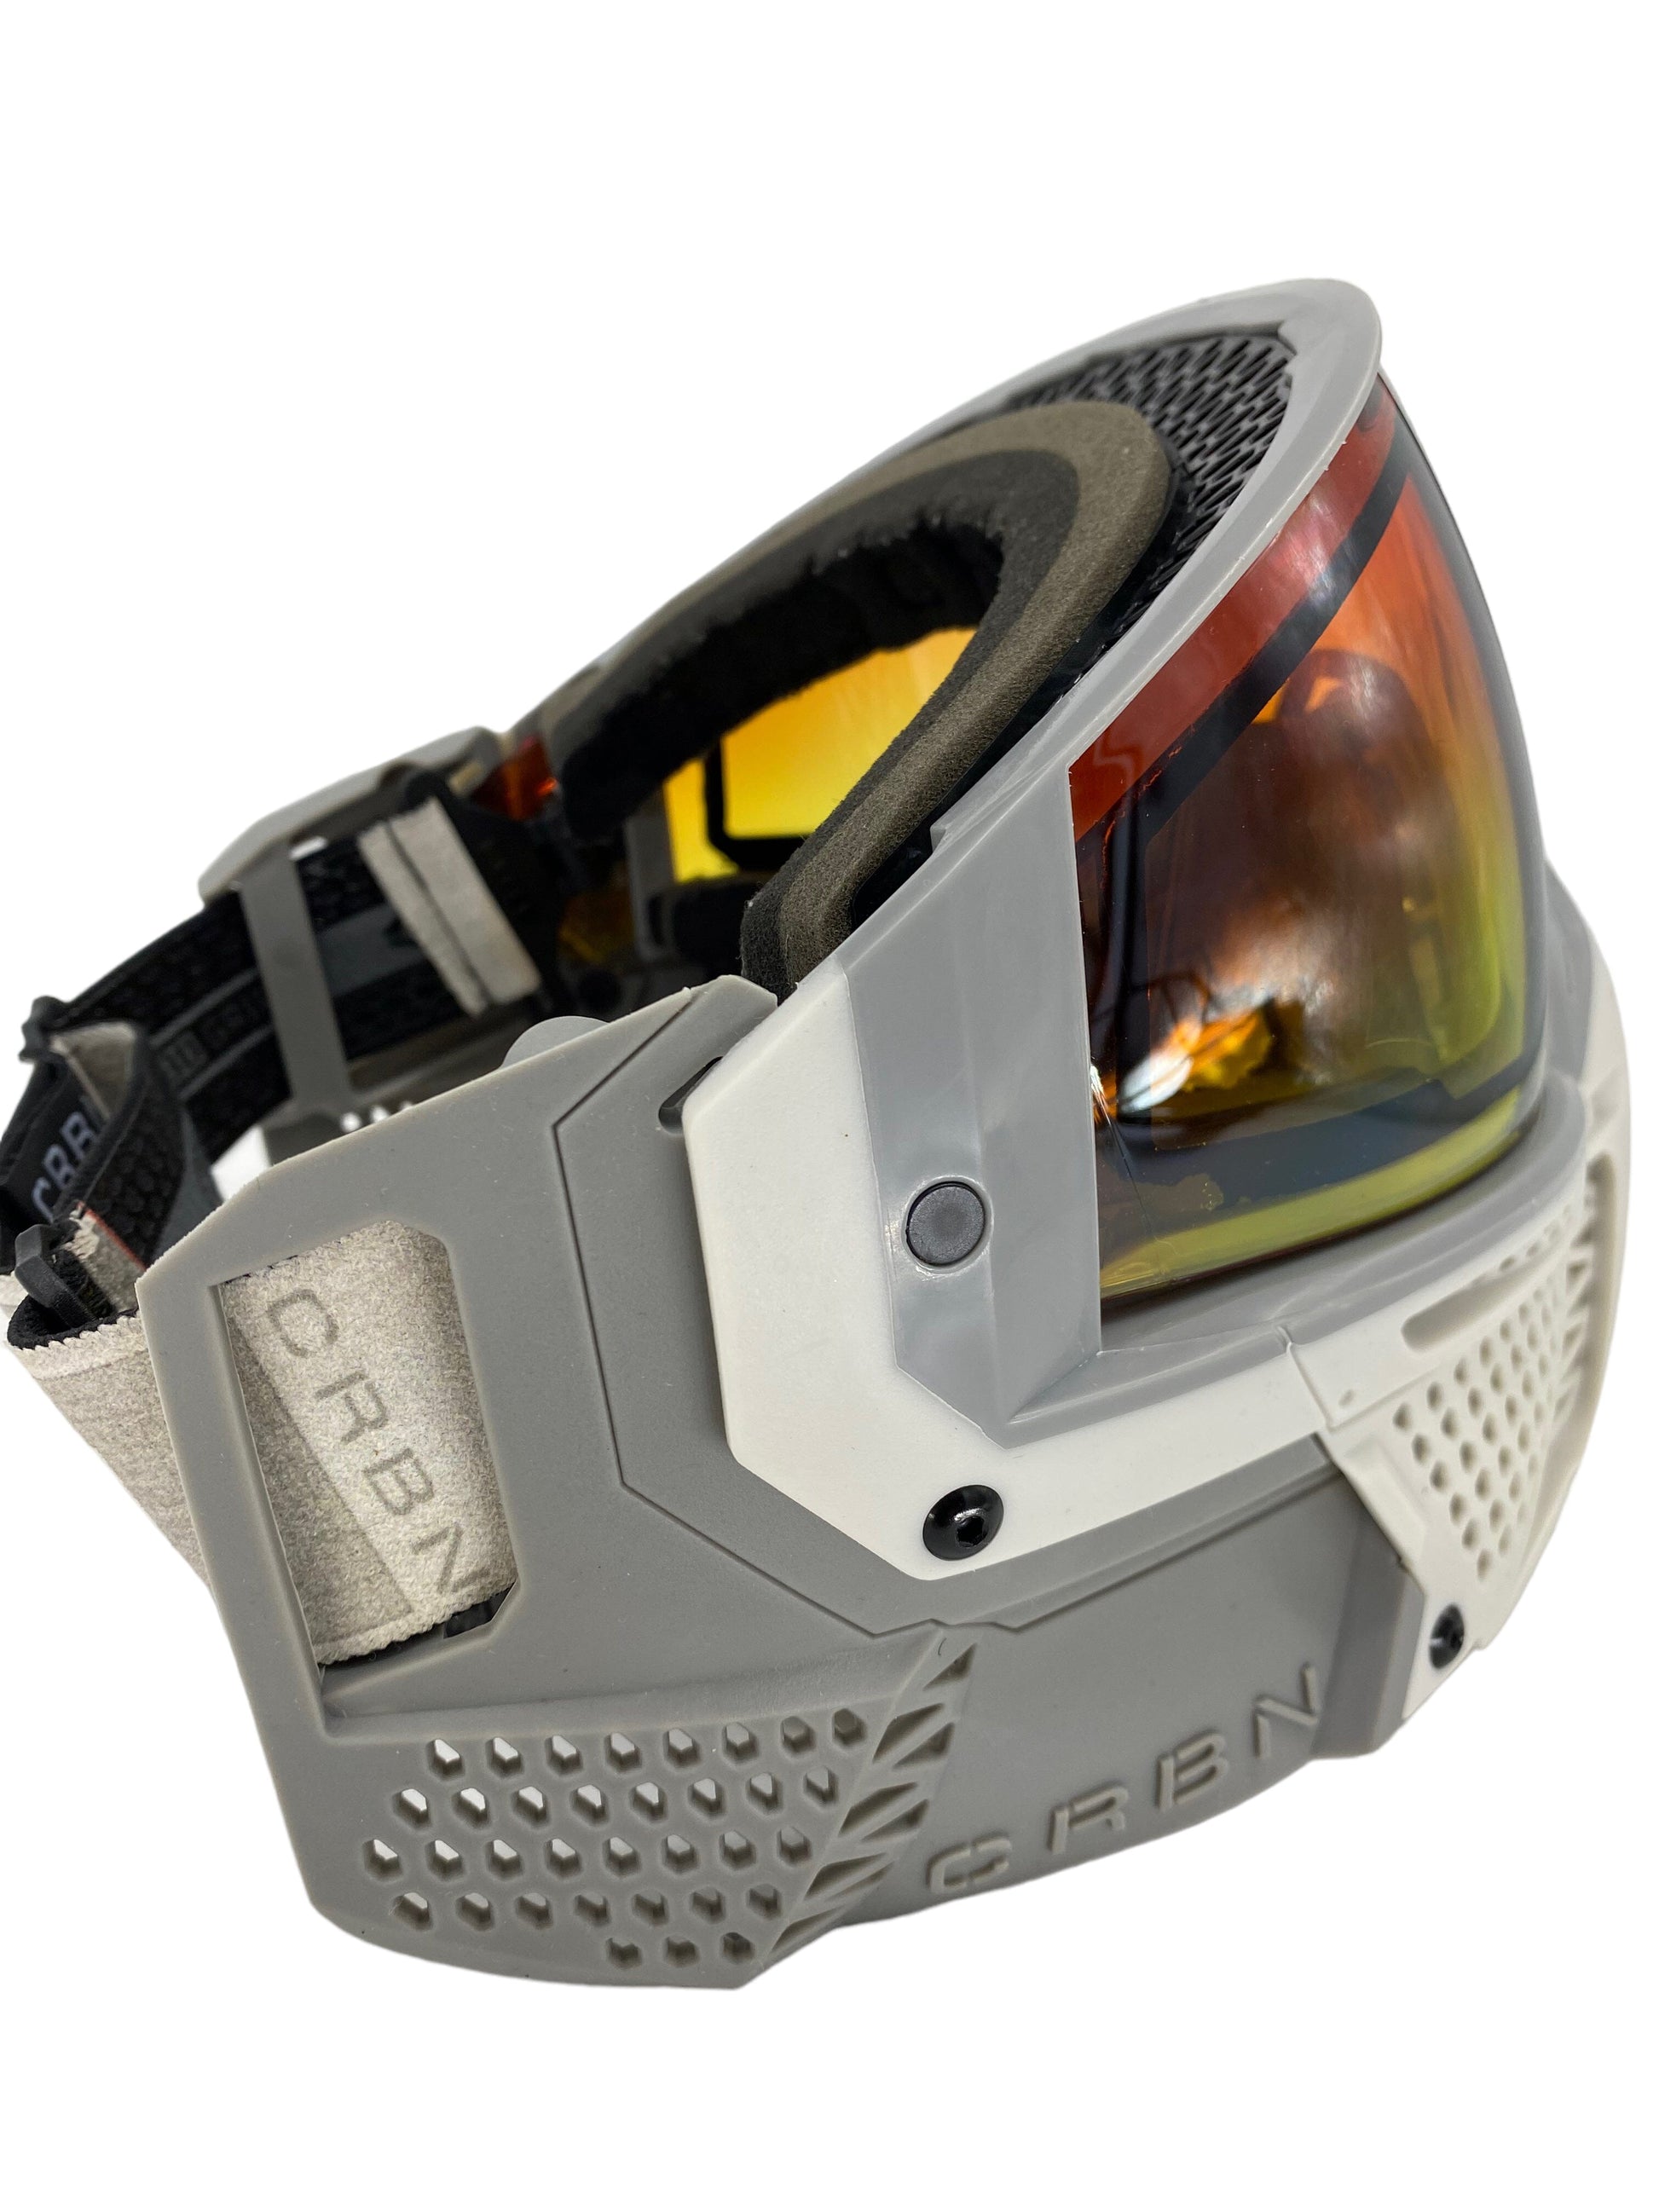 Used CRBN Carbon Paintball Zero SLD Series Goggle Mask - Less Coverage Paintball Gun from CPXBrosPaintball Buy/Sell/Trade Paintball Markers, Paintball Hoppers, Paintball Masks, and Hormesis Headbands